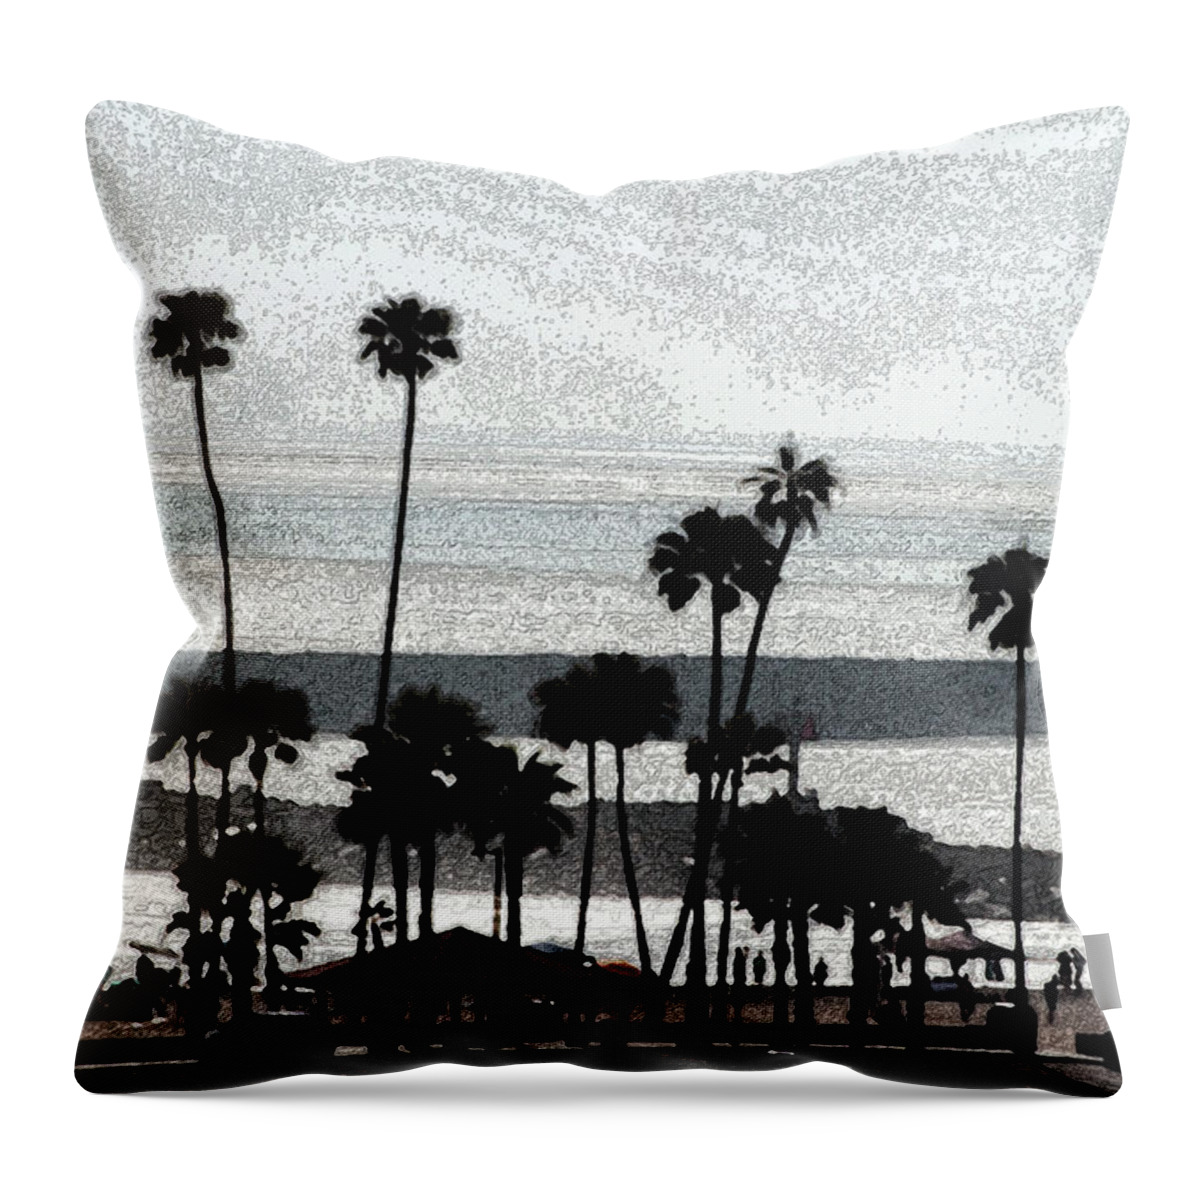 Oceanside Beach And Bay Throw Pillow featuring the photograph Oceanside Beach And Bay by Tom Janca